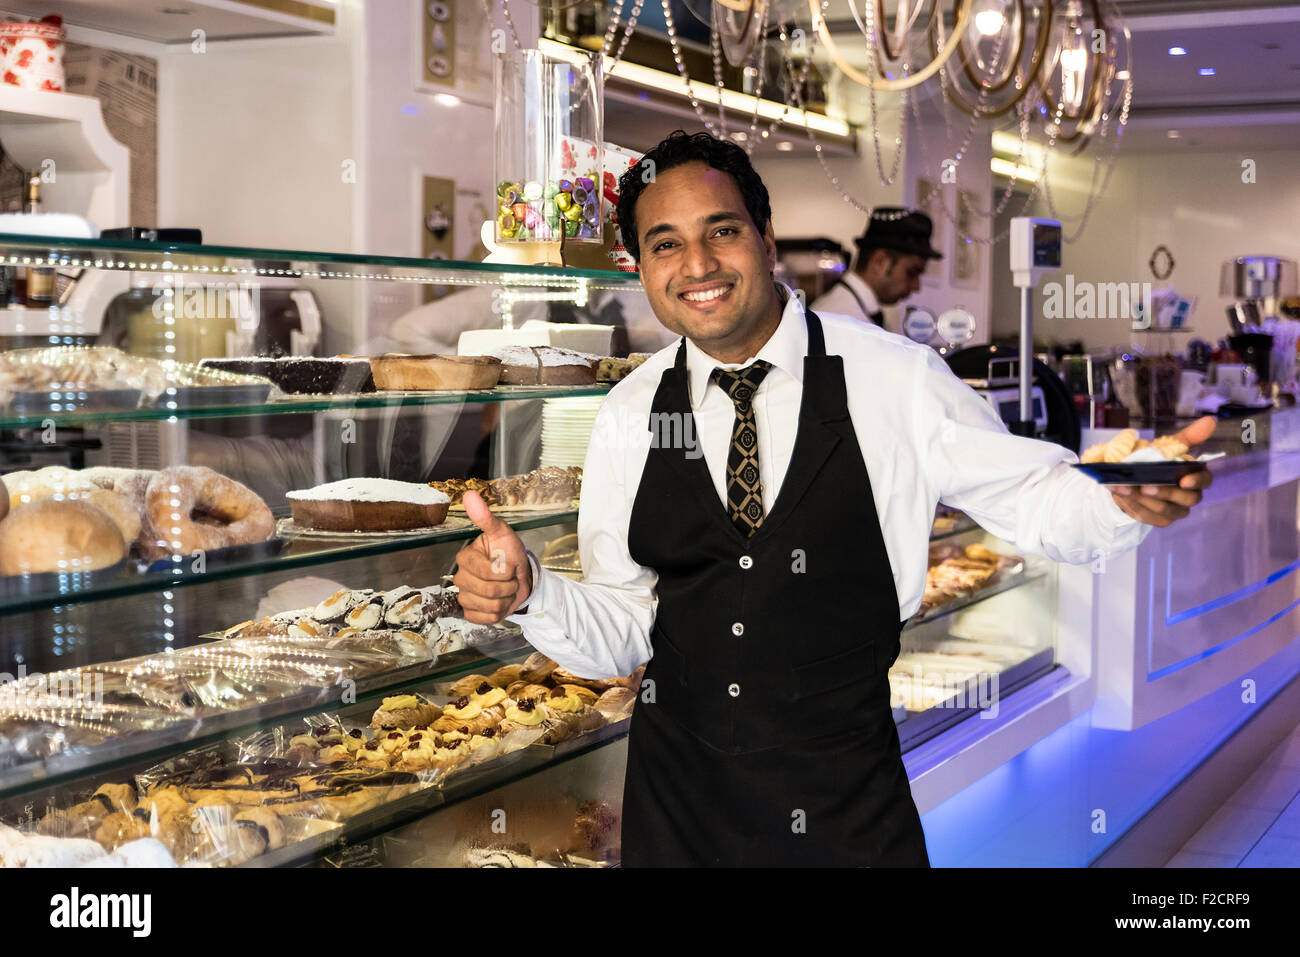 Greetings, service and samples from a pastry shop employee, Sorrento, Italy Stock Photo